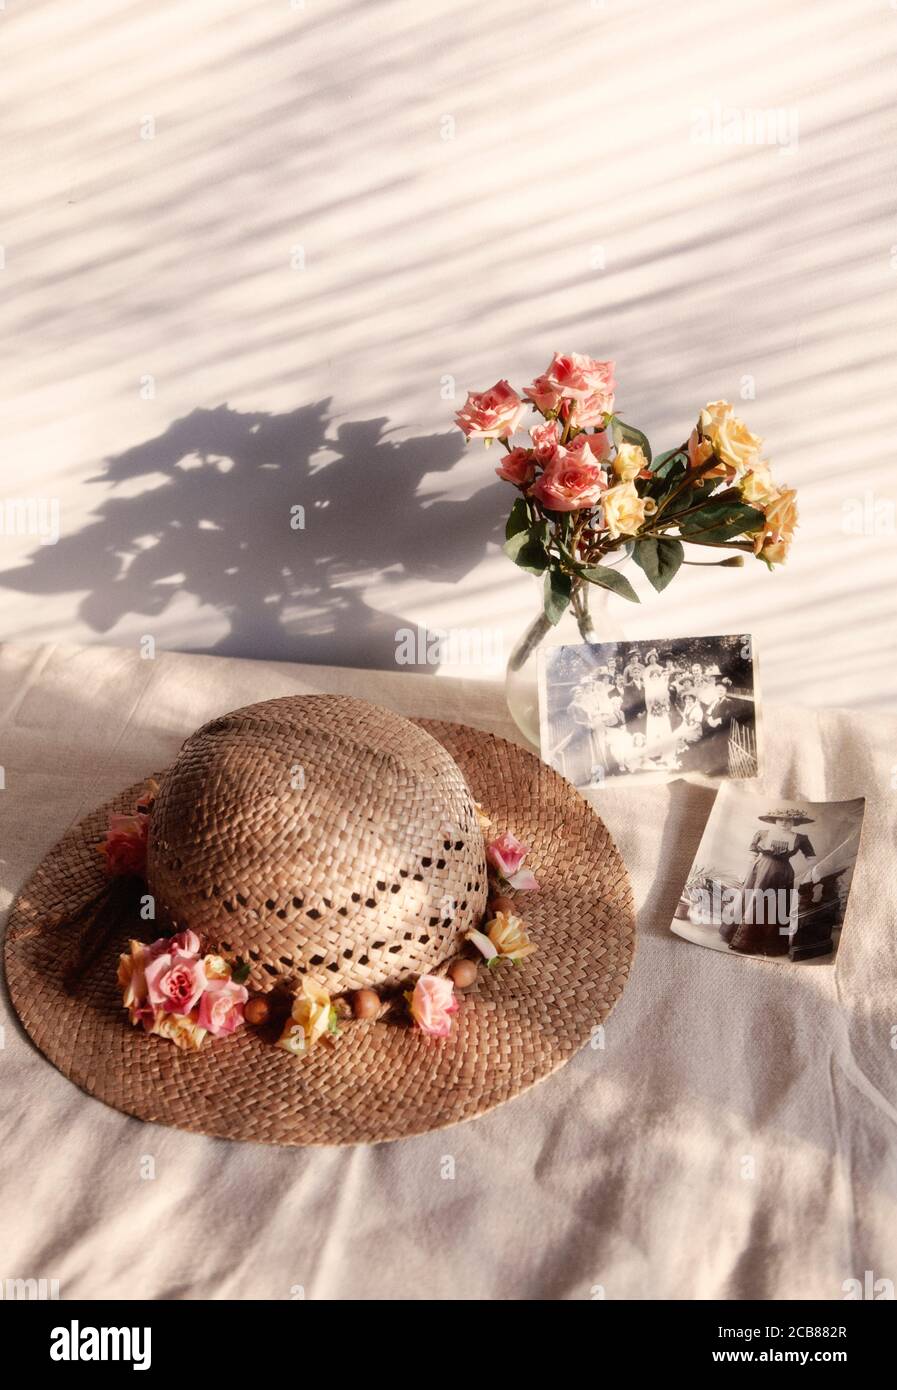 https://c8.alamy.com/comp/2CB882R/straw-hat-with-vase-of-roses-and-old-photographs-2CB882R.jpg